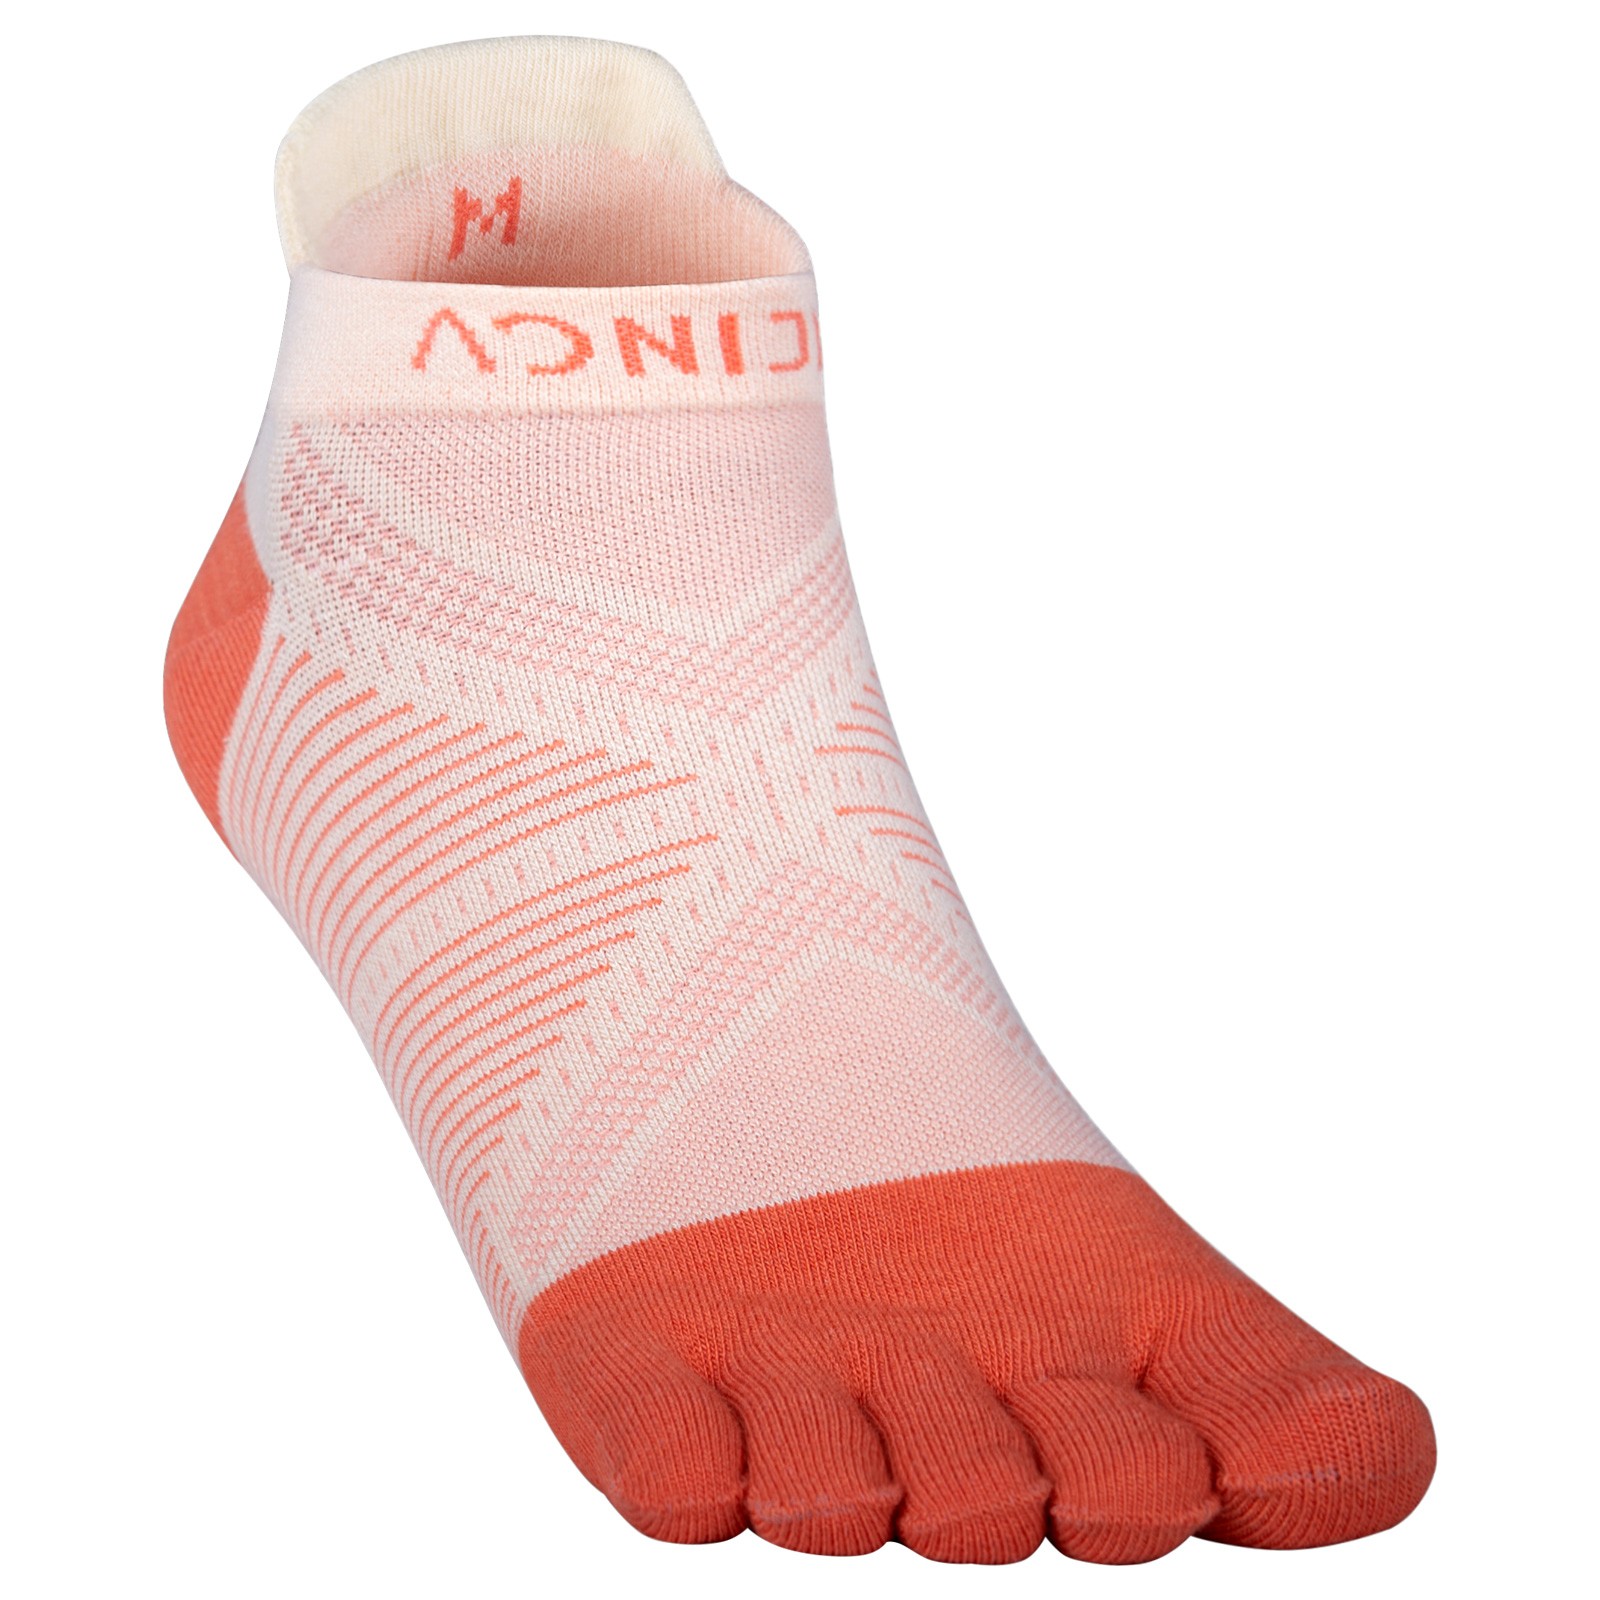 1Pair Aonijie E4824 New Sports Fve-finger Socks Breathable Coolmax Wear-resistant Outdoor Athletic Toe Socks for Running Hiking